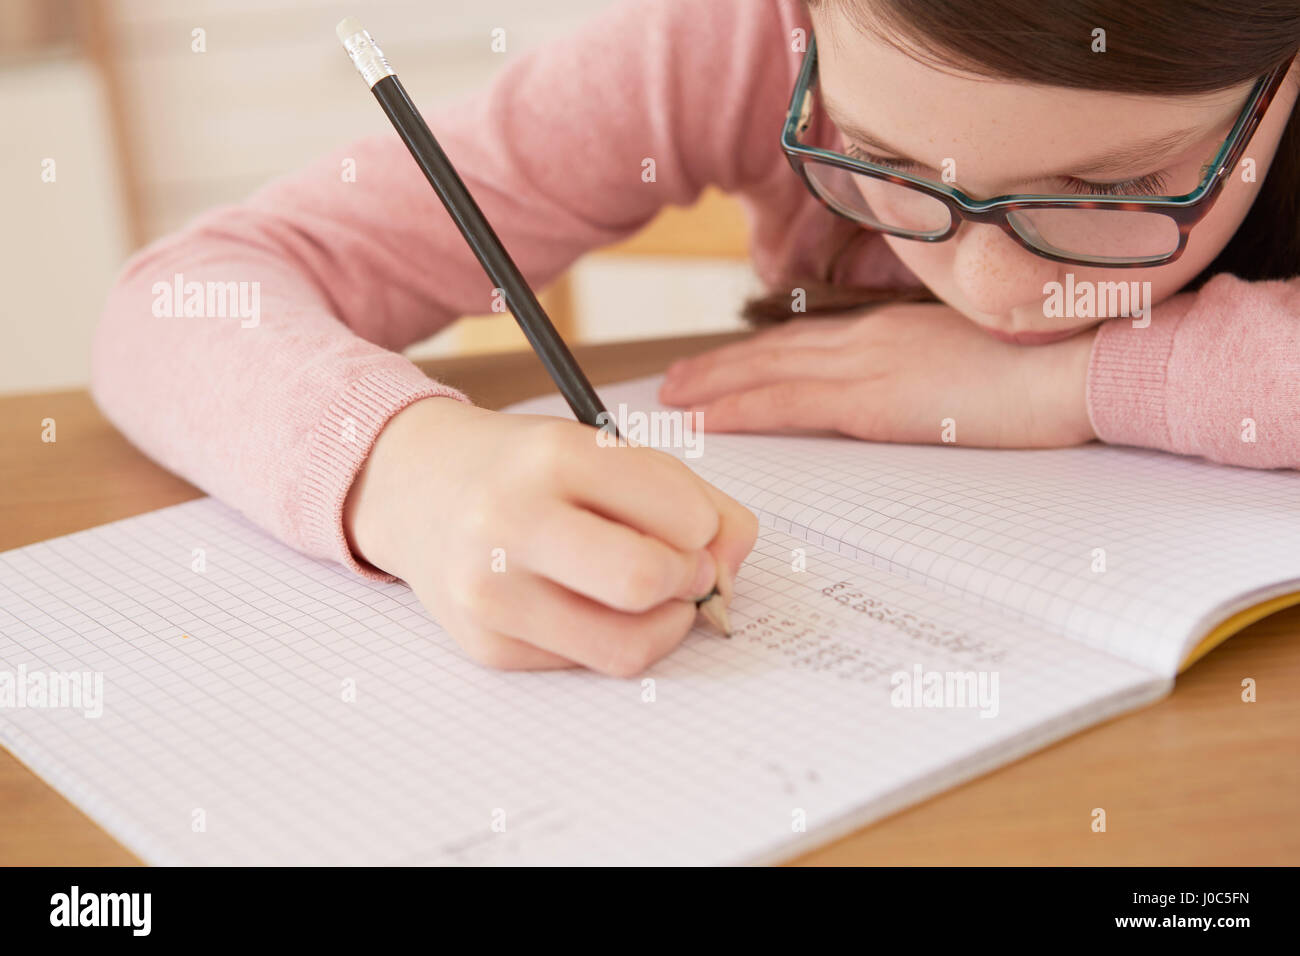 Close up of girl doing homework at table Stock Photo